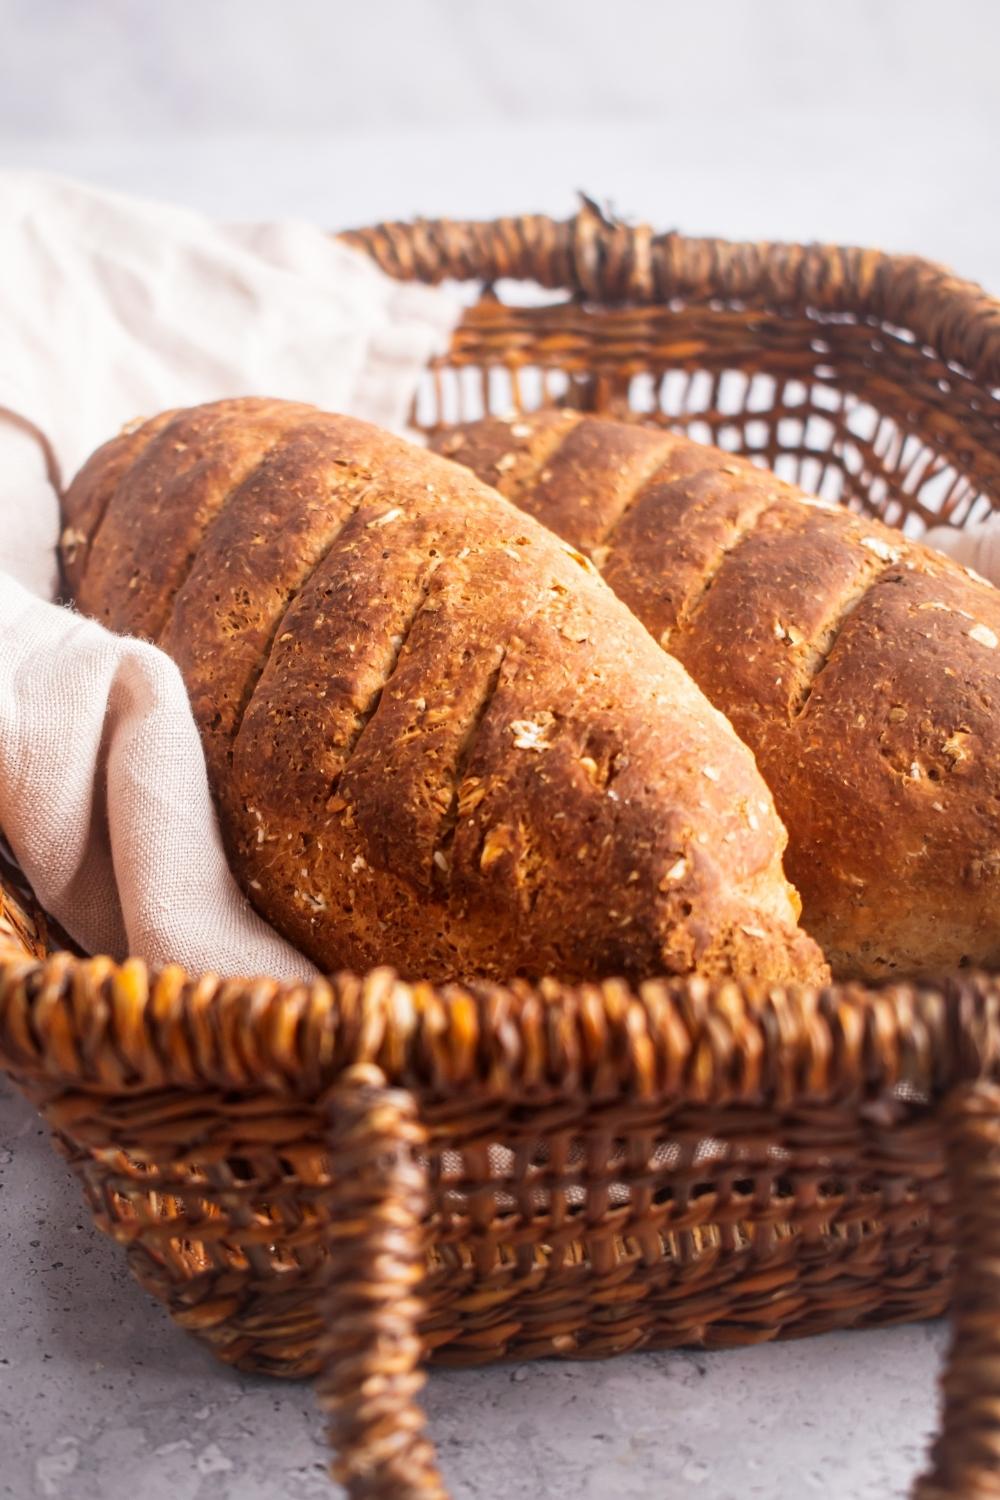 A close-up of two loaves of bread in a basket with a kitchen towel lining it.